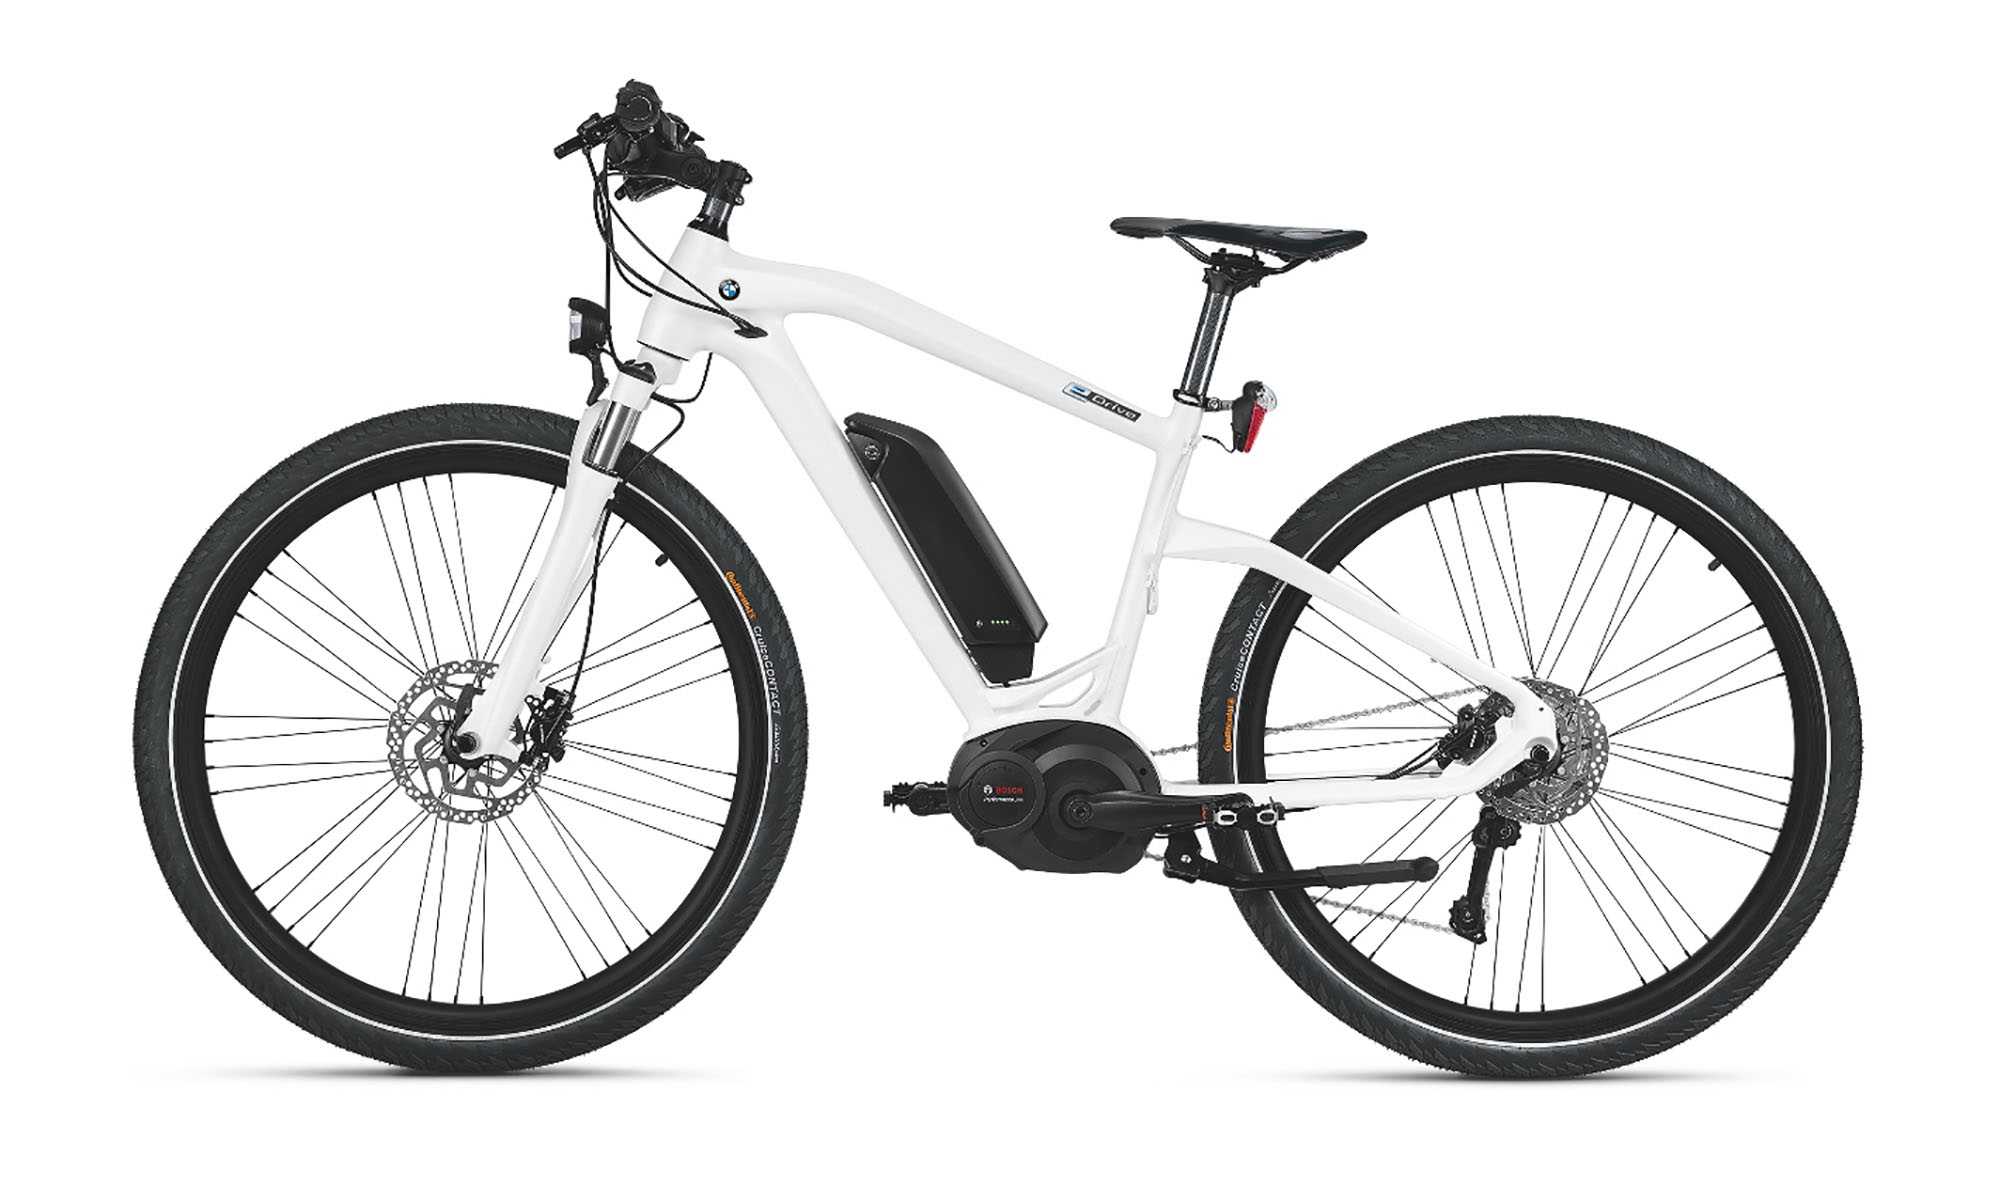 BMW of North America Presents the New BMW Cruise e-Bike as Part of its 2016 Collection.